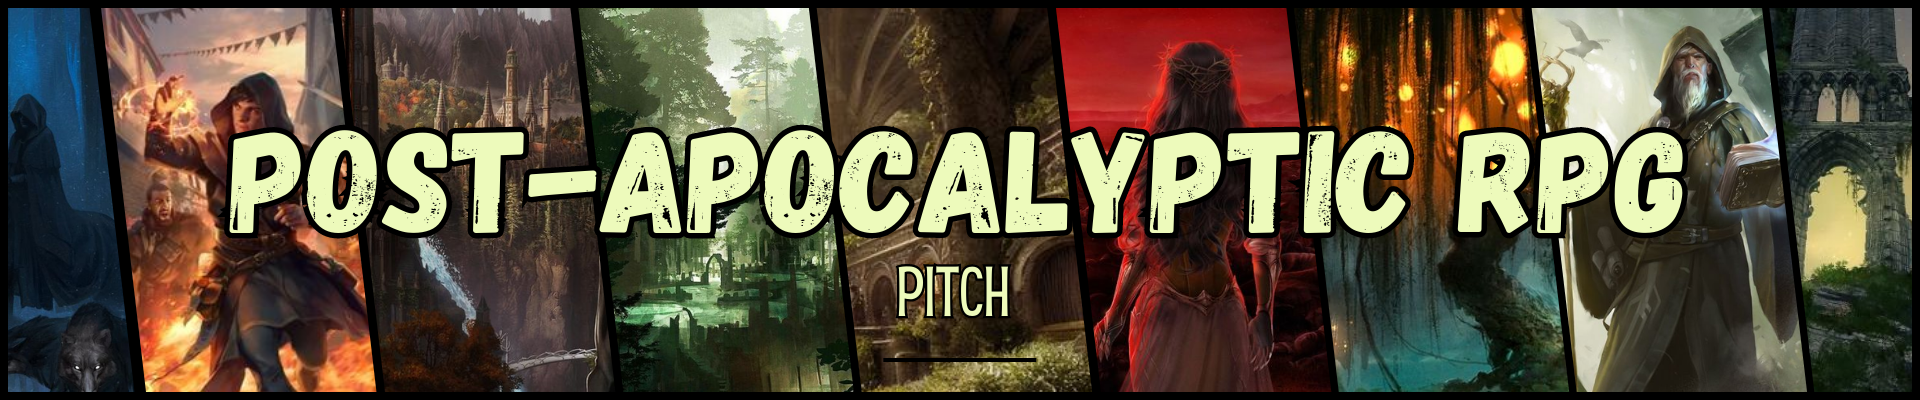 Pitch - Post Apocalyptic Arthurian RPG